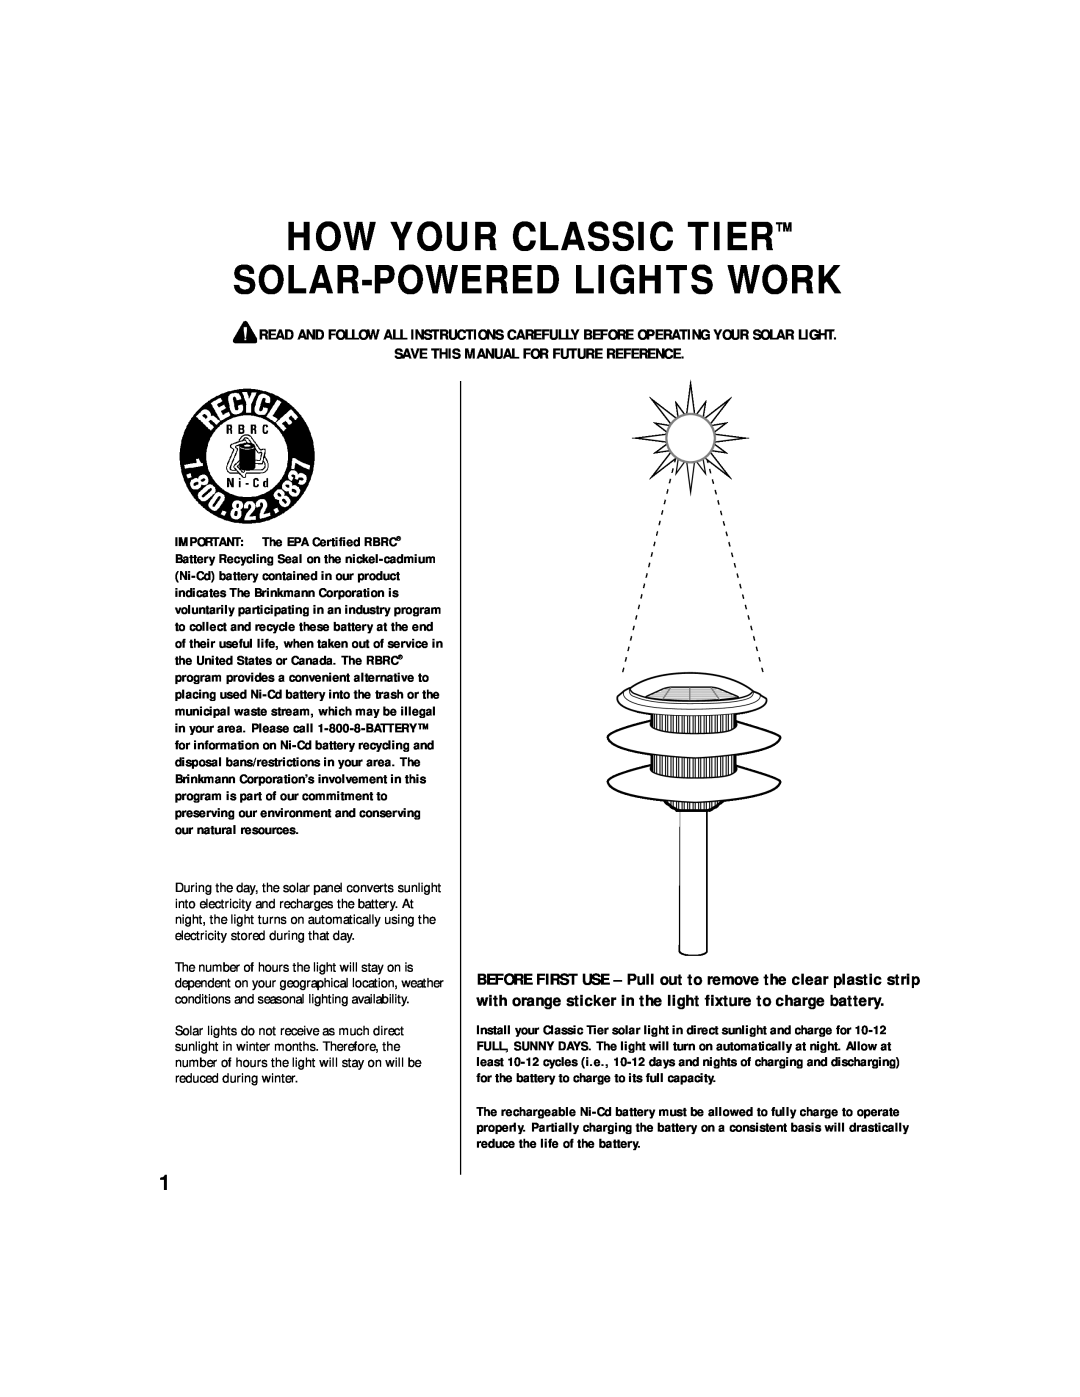 Brinkmann 822-0429-0 owner manual Save This Manual For Future Reference, How Your Classic Tiertm Solar-Powered Lights Work 